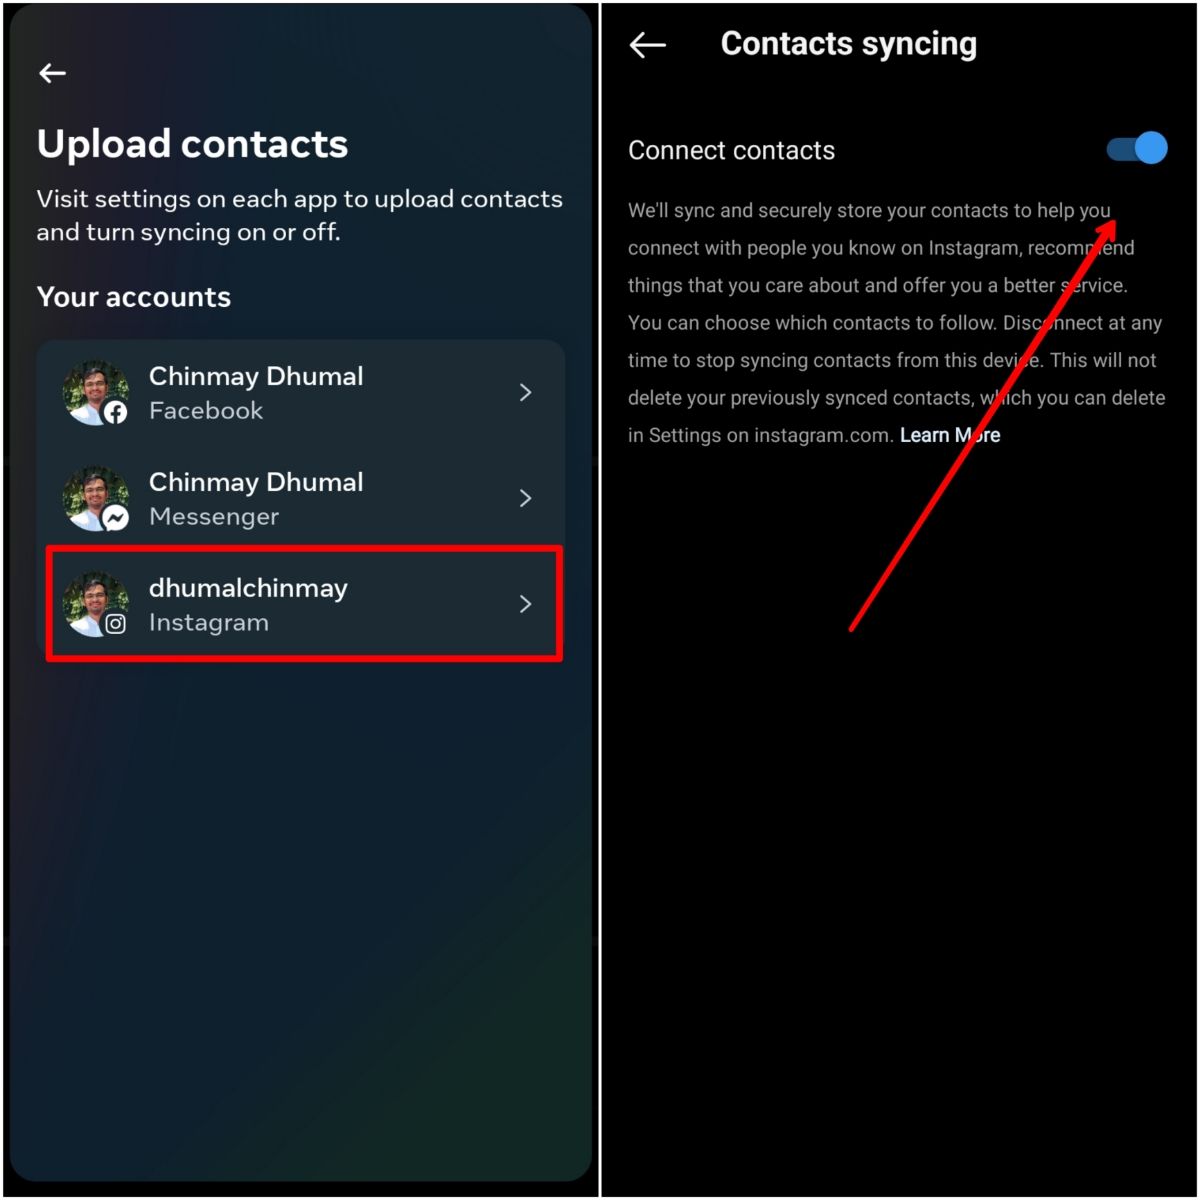 connect contacts on Instagram